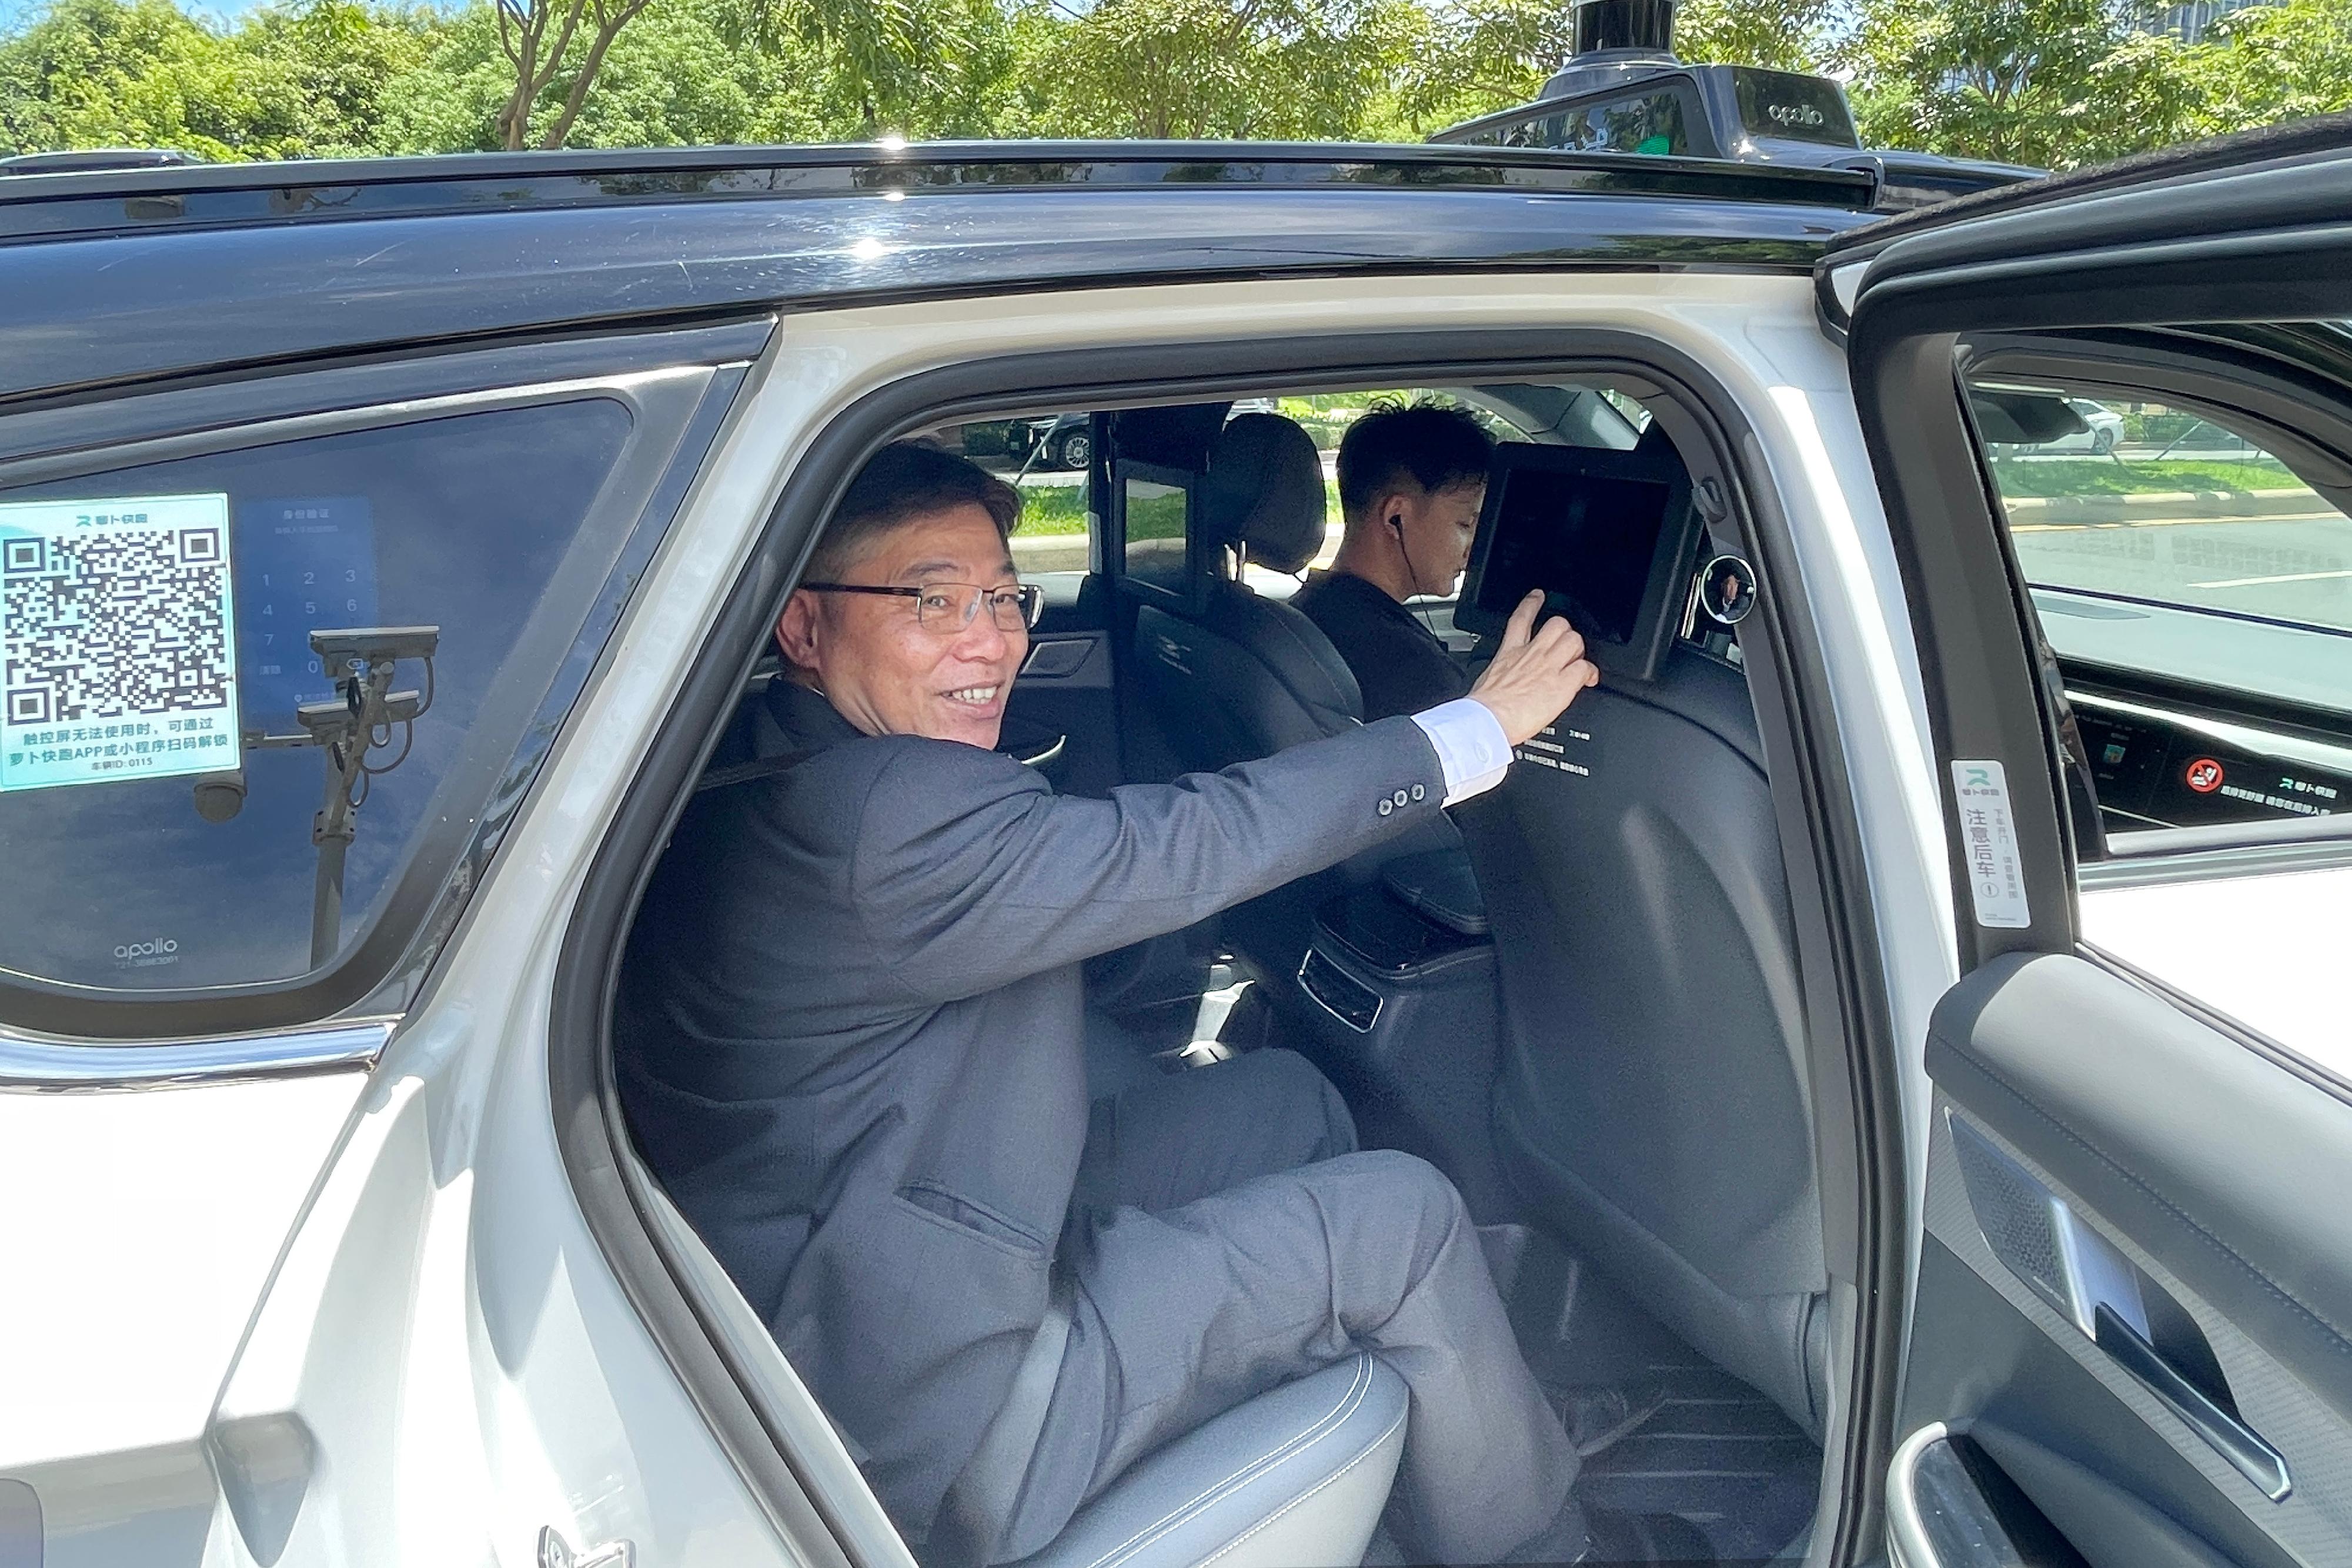 The Secretary for Transport and Logistics, Mr Lam Sai-hung (left), today (July 20) took a test ride in an autonomous vehicle in Nanshan, Shenzhen.